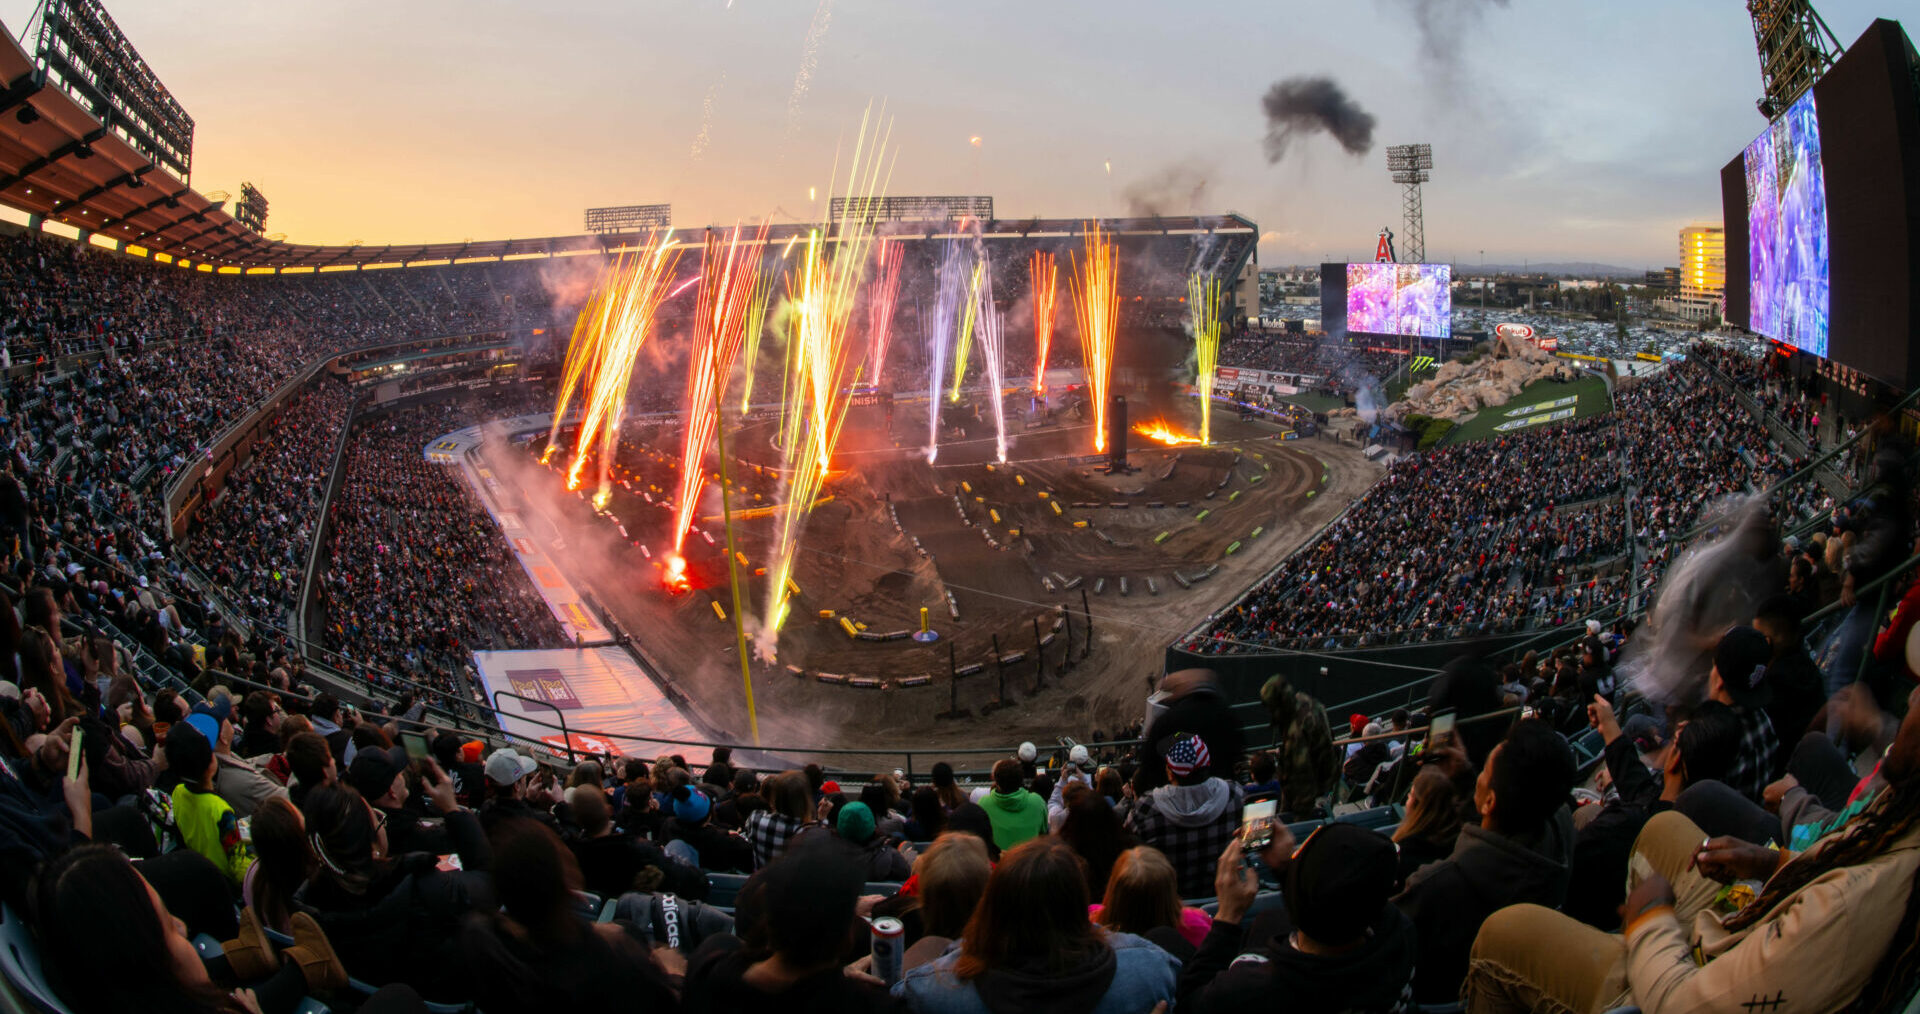 Angel Stadium hosted its 33rd season opener. For the fourth year in a row, and the tenth time in 11 years, the event sold-out. 45,050 fans enjoyed the thrilling 2024 A1 race action. Photo courtesy Feld Entertainment, Inc.